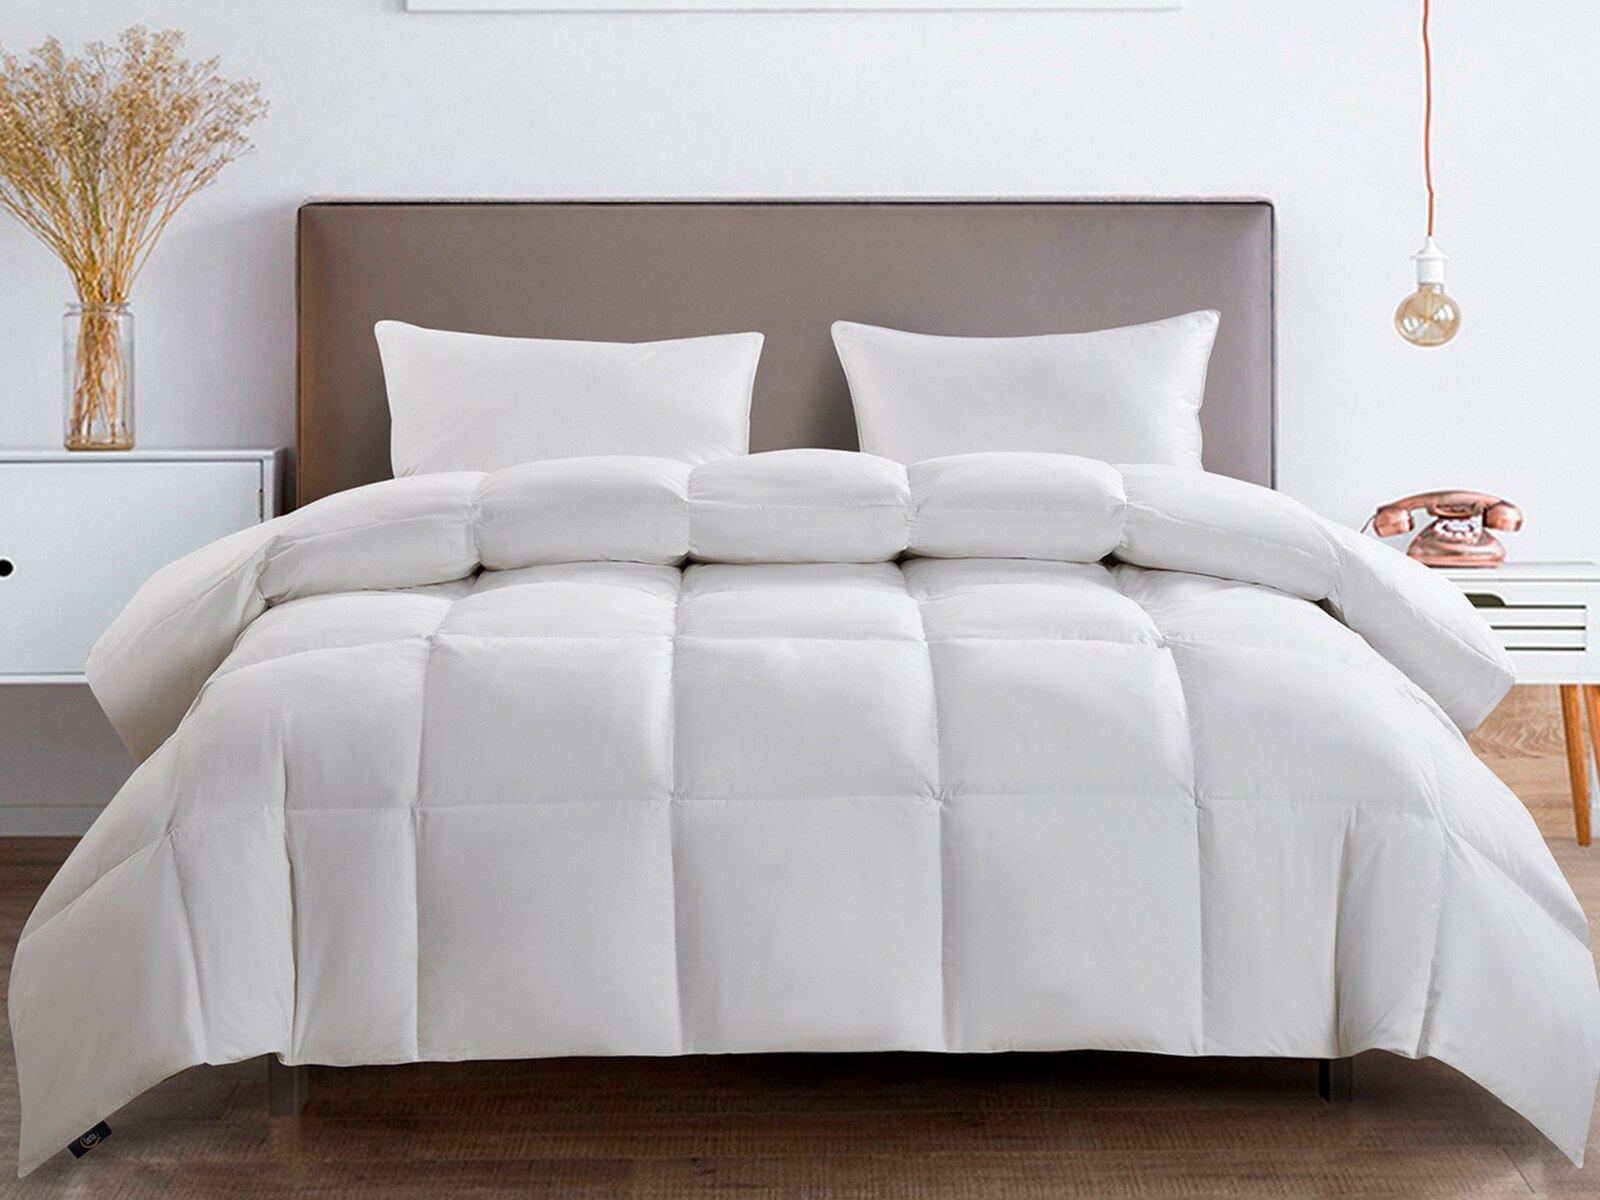 Extra Warmth Goose Feather & Down Fiber Comforter